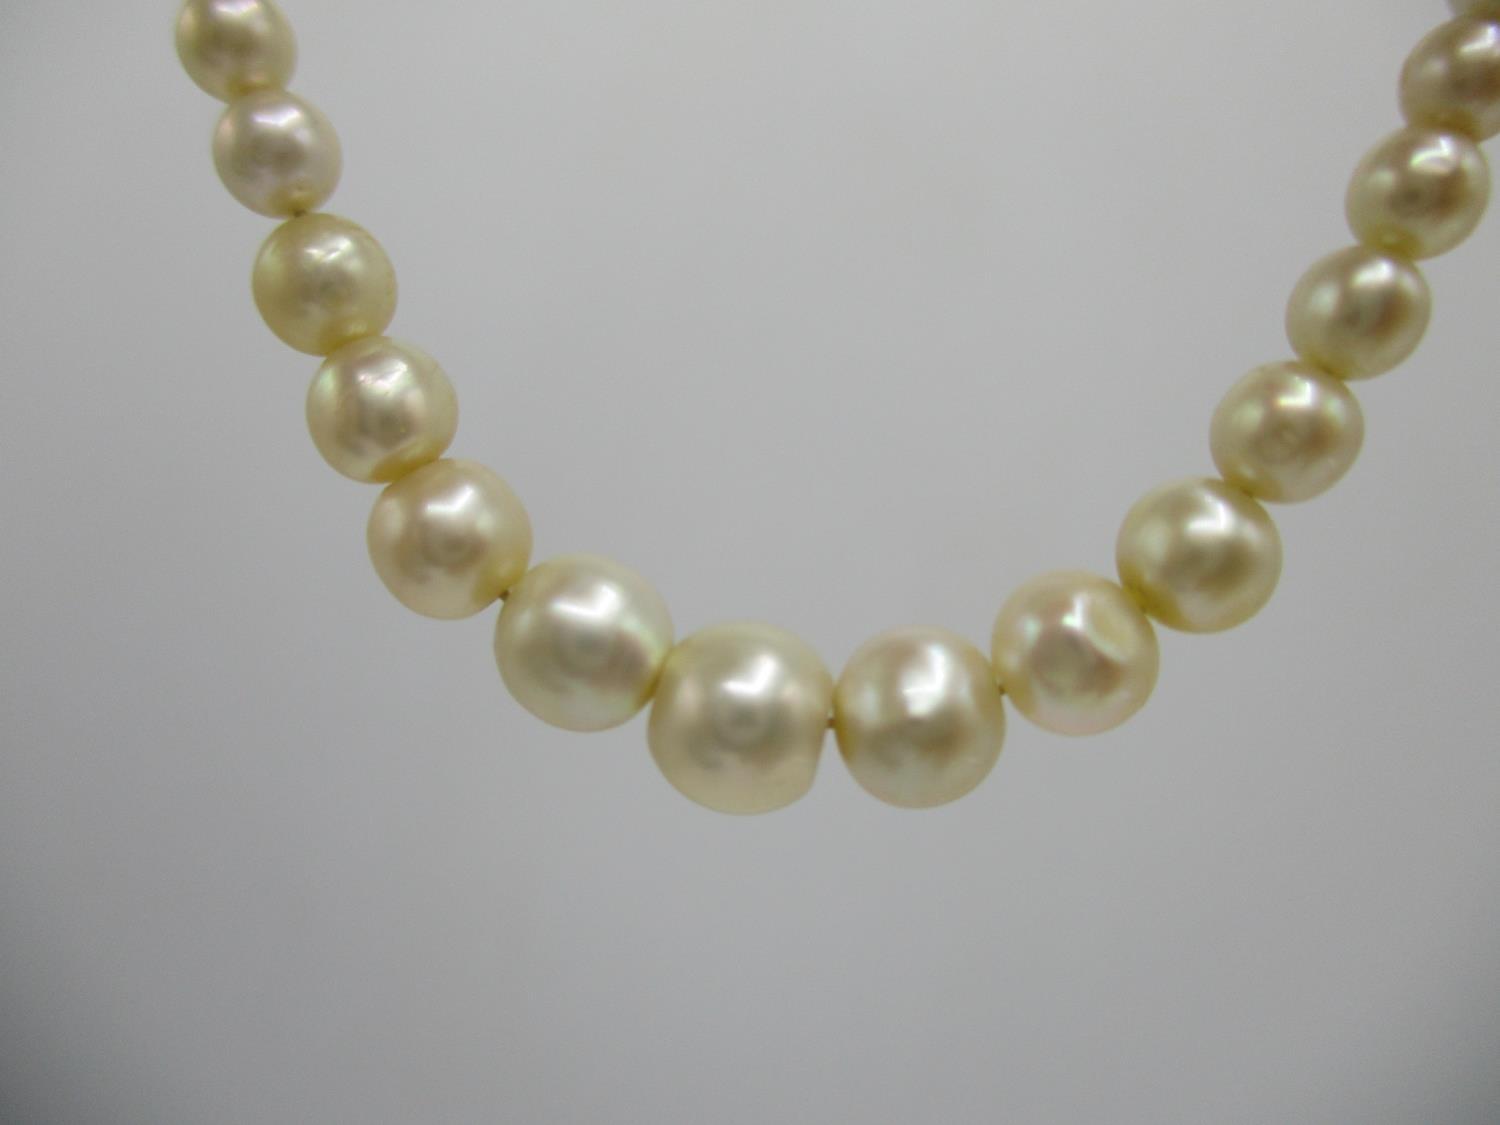 A natural pearl necklace with a gold clasp set with diamonds - Image 5 of 6